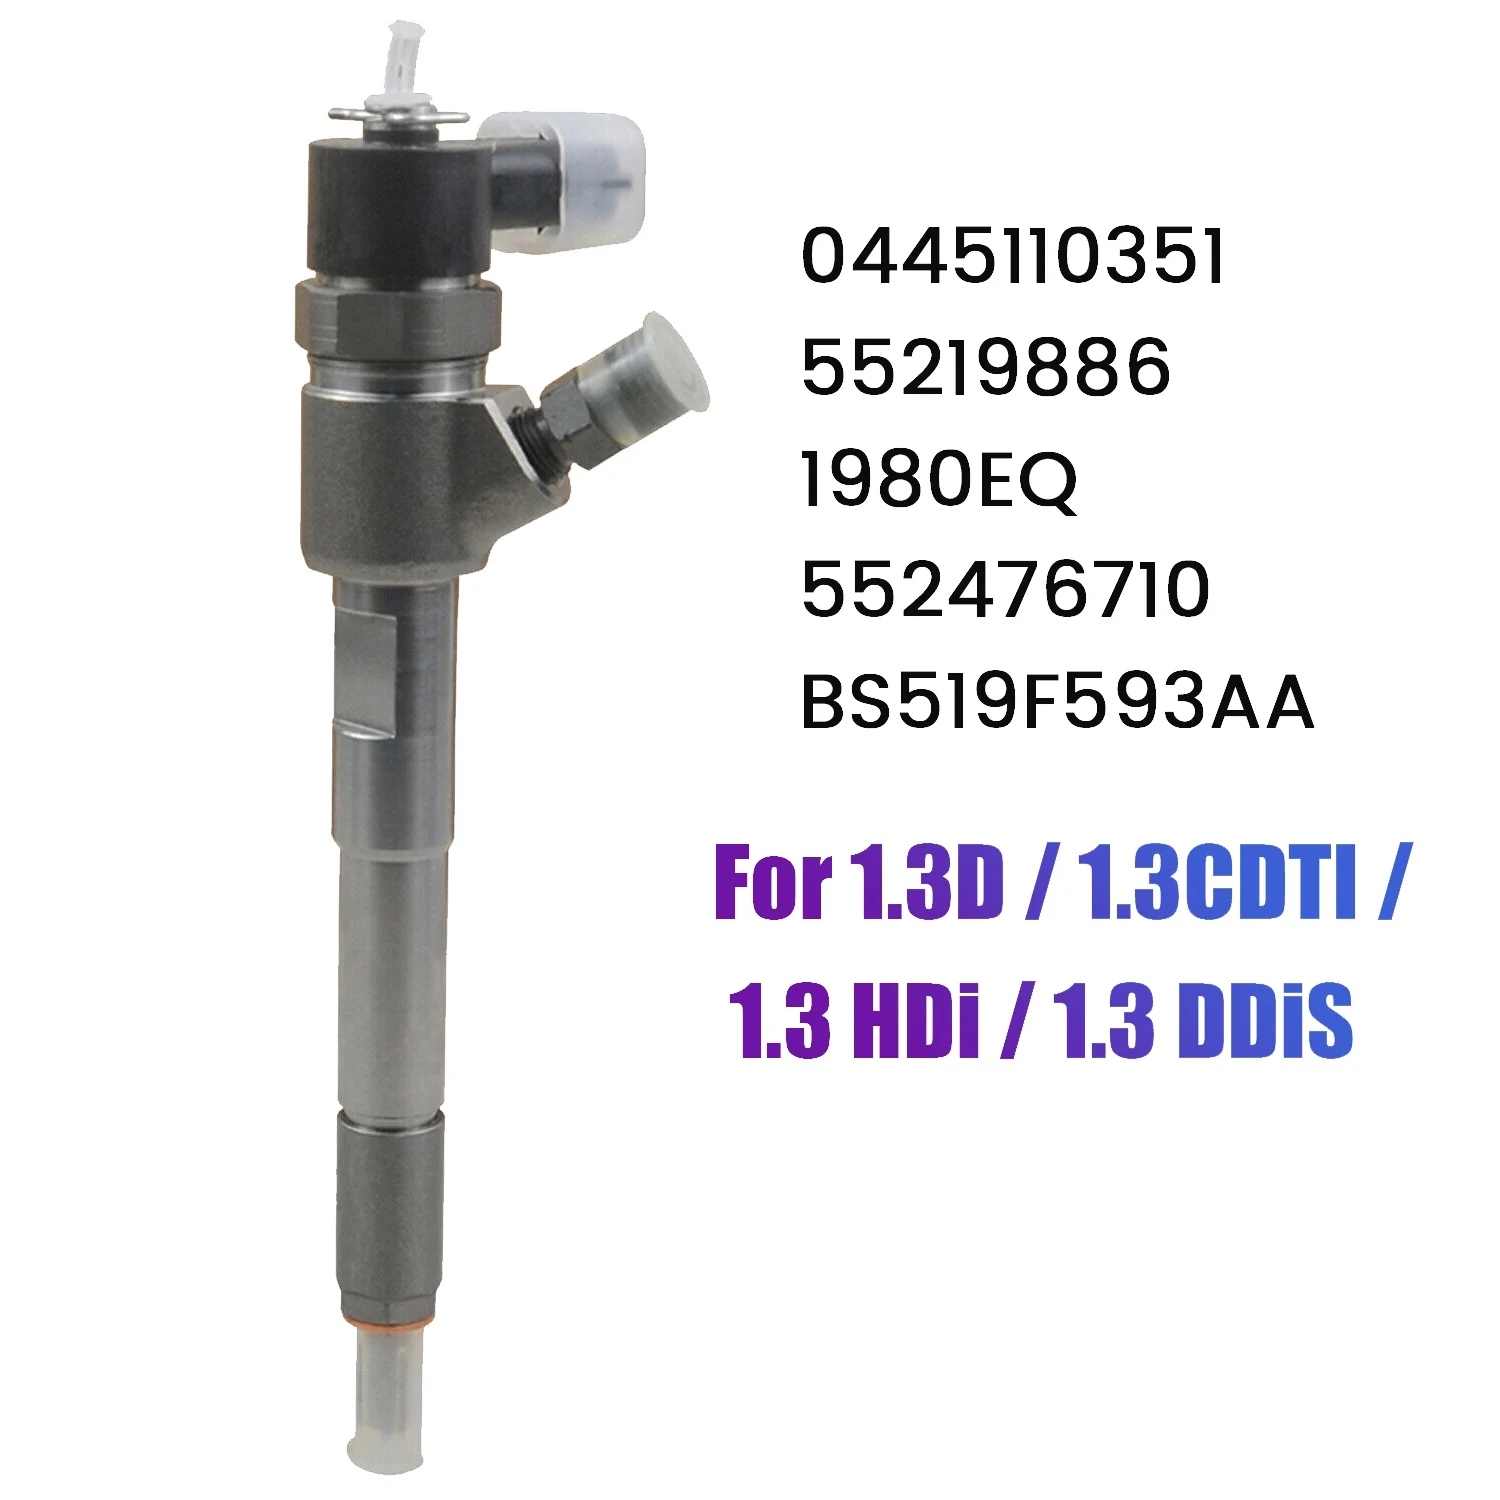 

NEW 0445110351 Diesel Fuel Injector for Fiat 500 PANDA DOBLO PUNTO Ford VAUXHALL OPEL COMBO 1.3D 1.3 TDCi